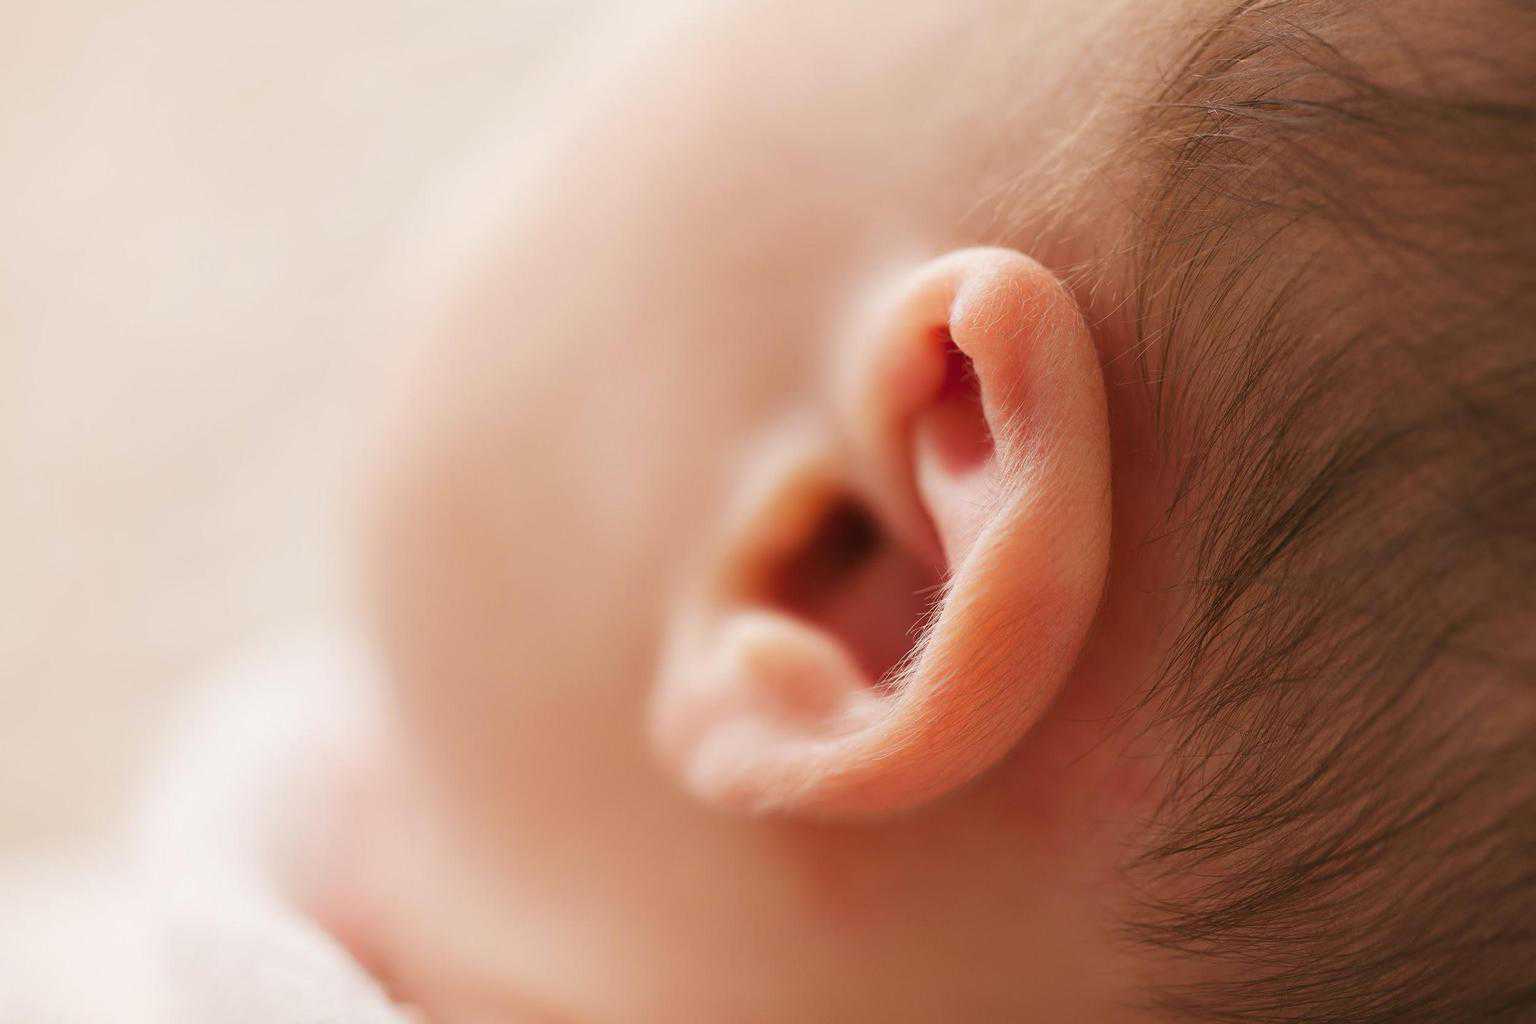 Quick &  Easy Guide On How To Clean Baby Ear Wax Safely